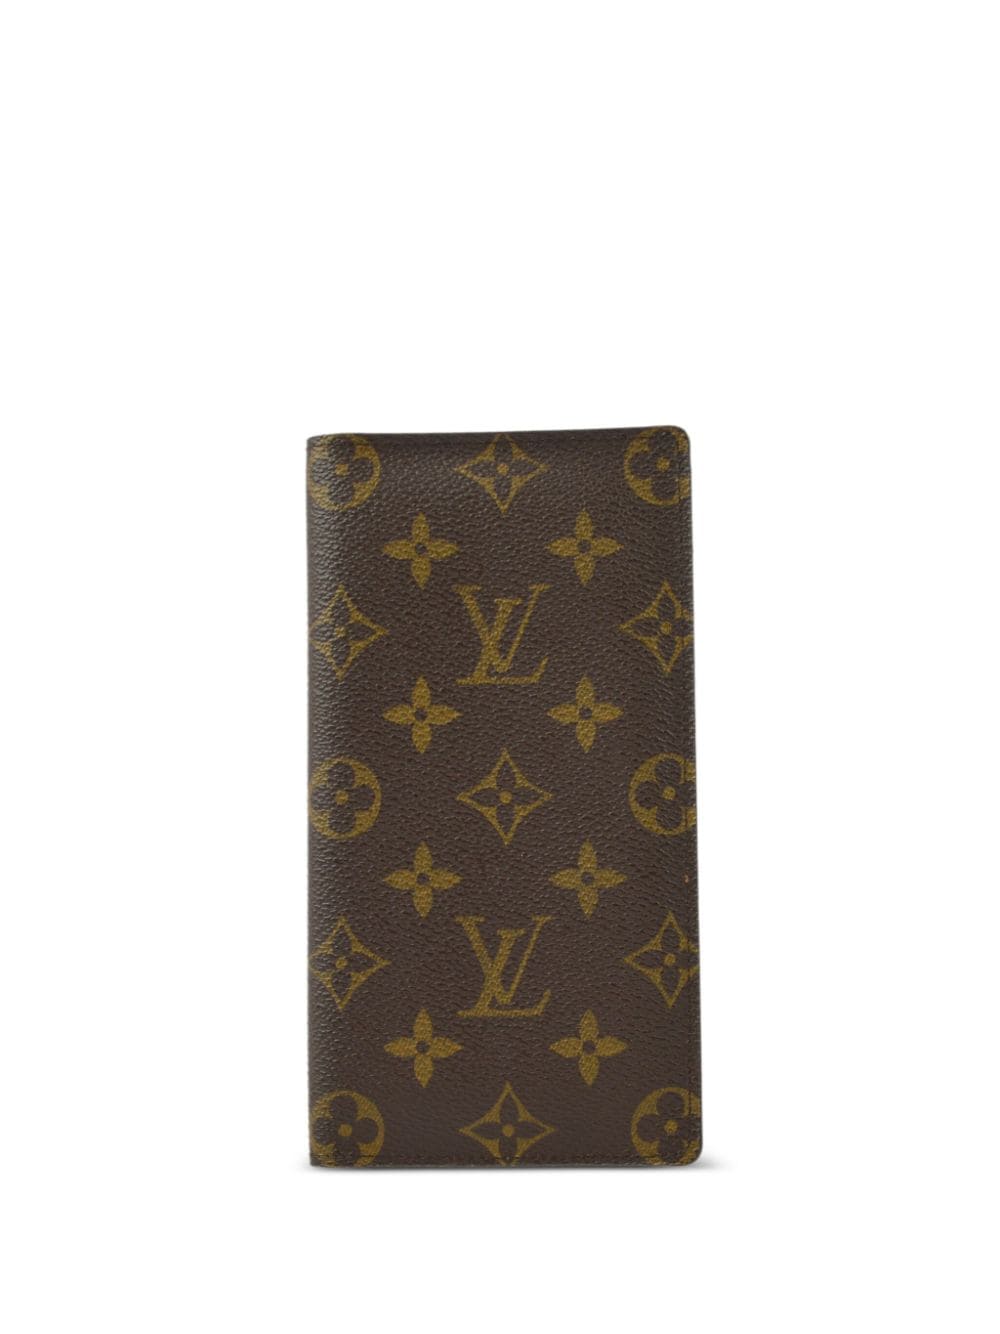 Pre-owned Louis Vuitton 2001 Porto Valle Cardholder In Brown